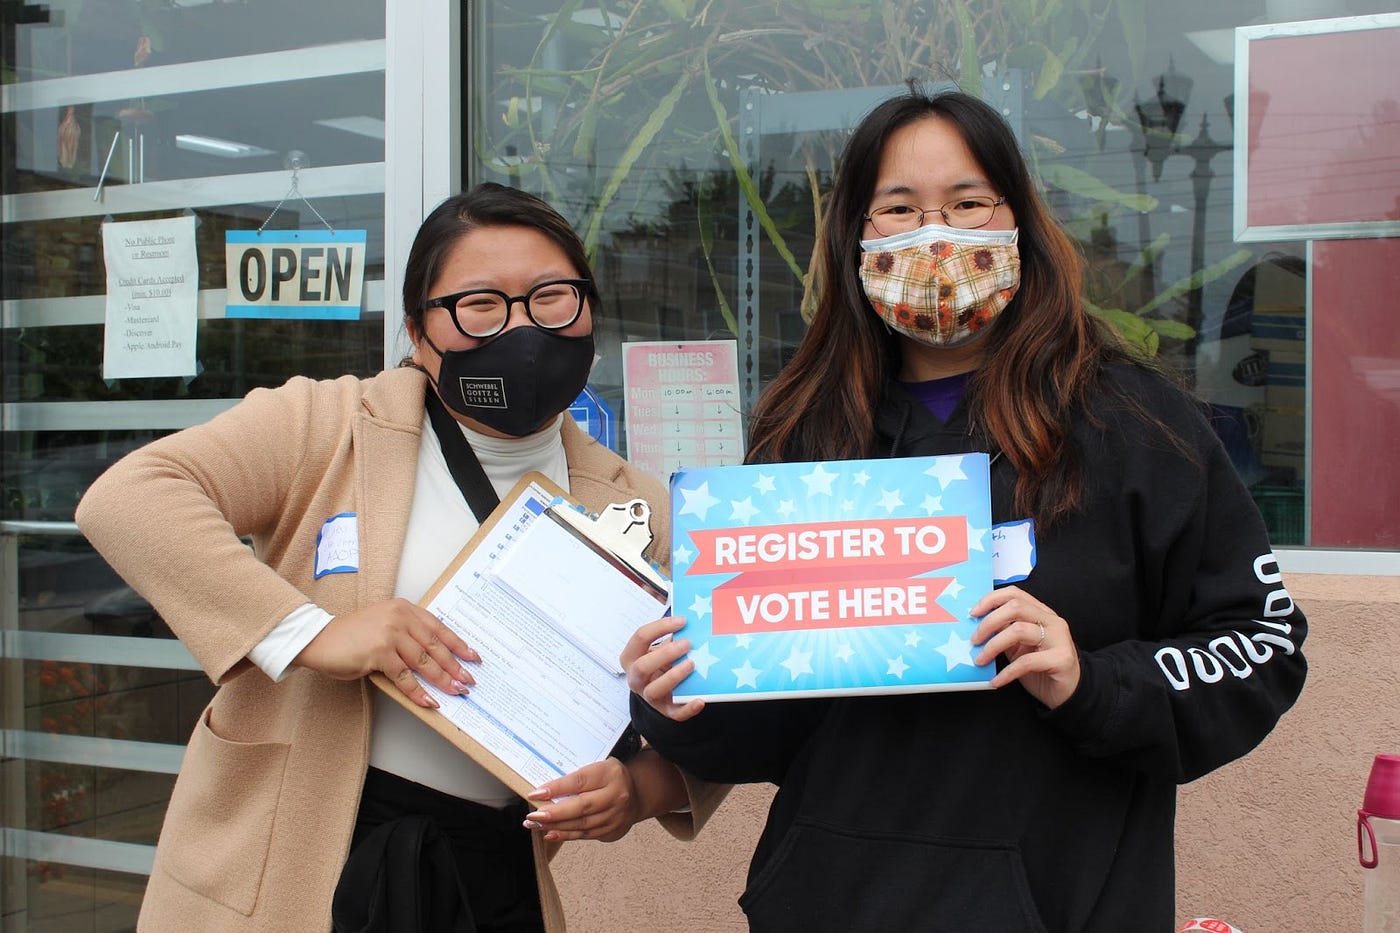 Volunteers Dieu and Elizabeth outside an Asian grocery store helping community members get registered to vote for National Voter Registration Day.